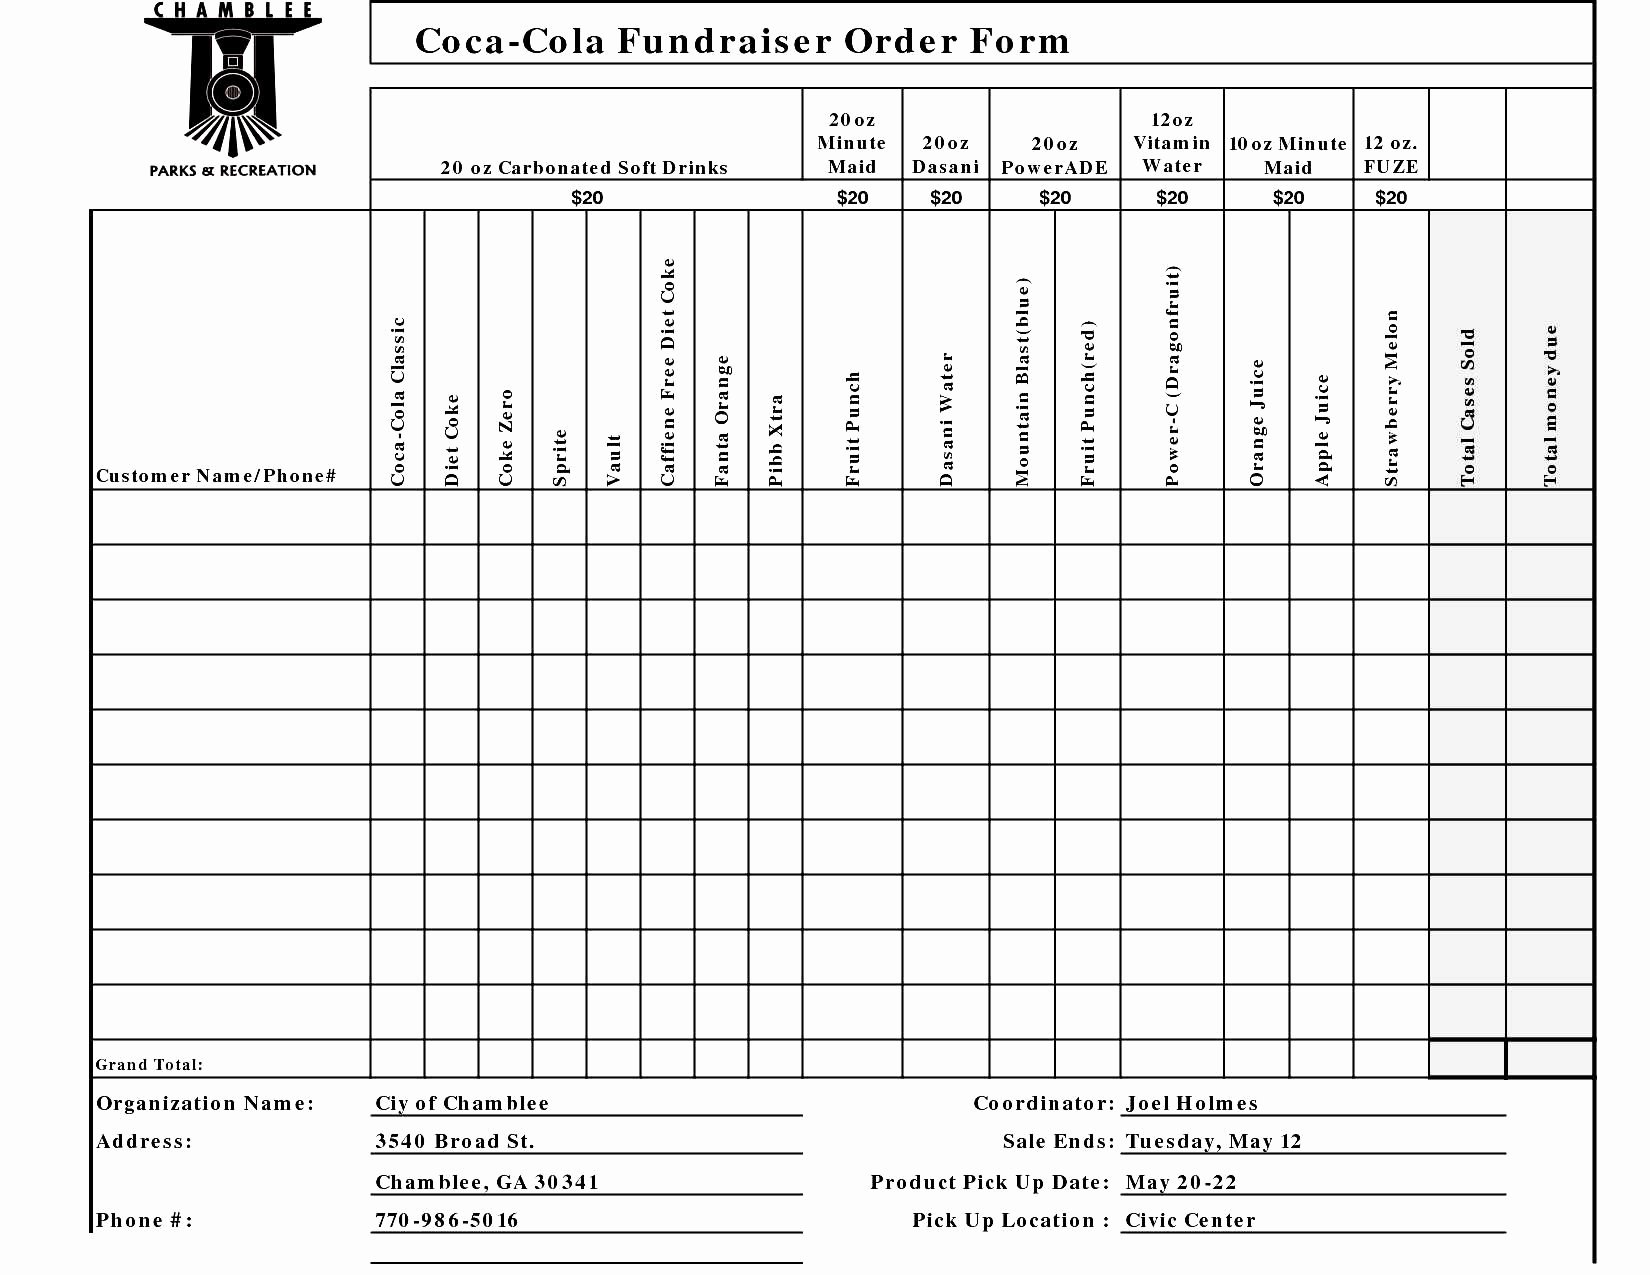 Excel order form Template Lovely Free Fundraiser order form Template Excel